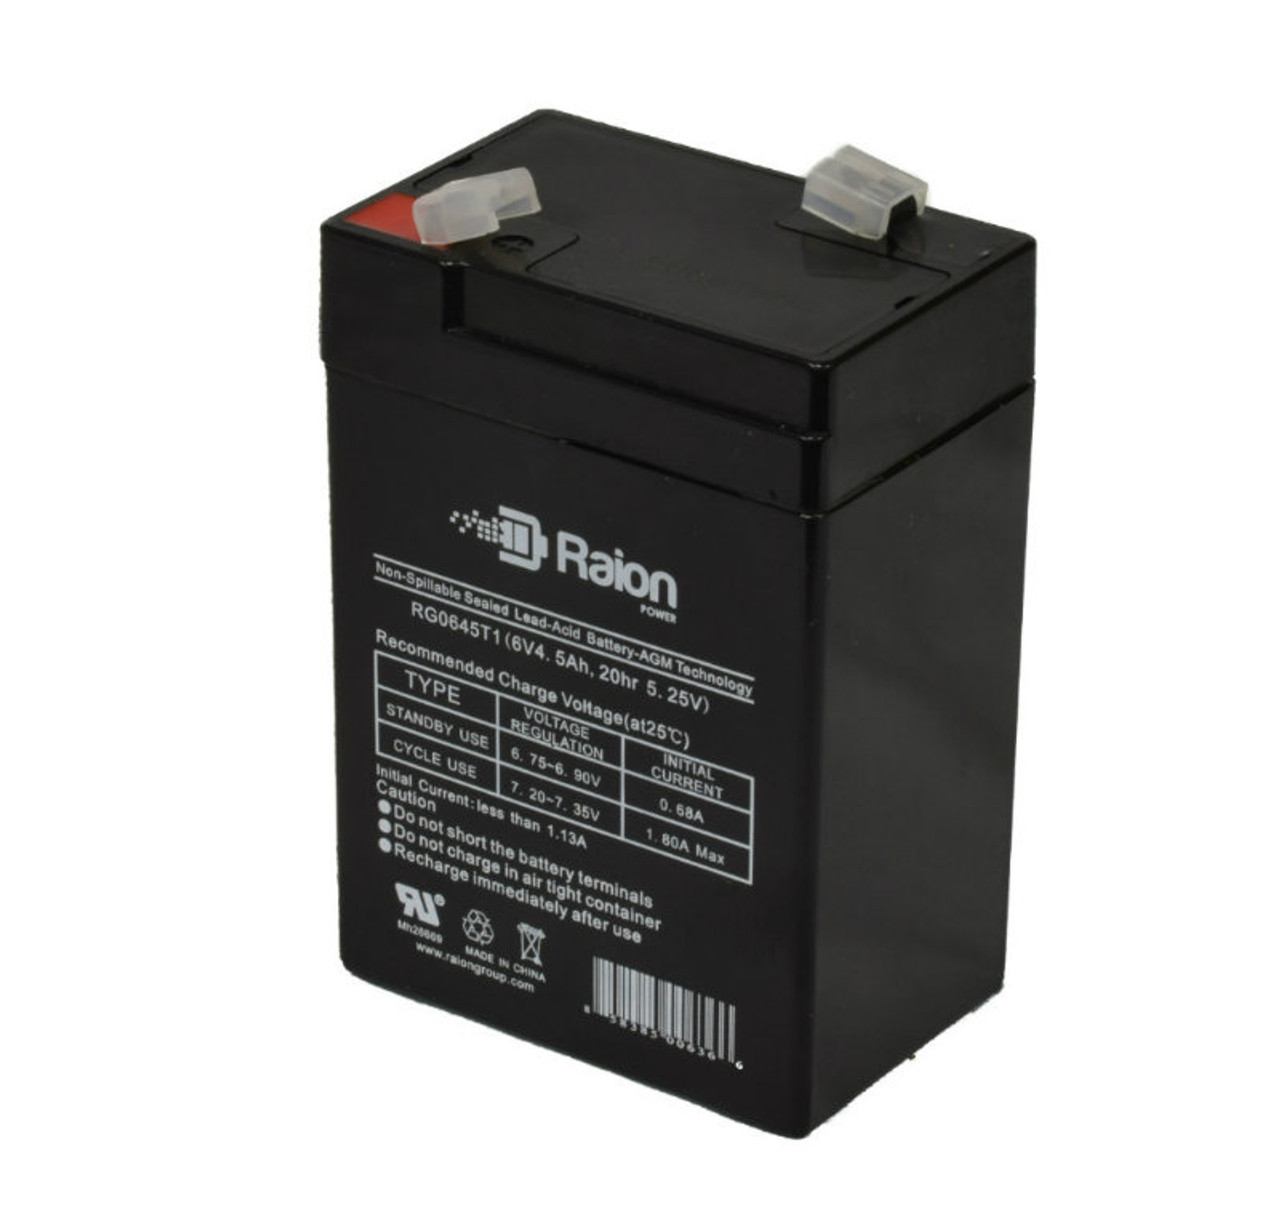 Raion Power RG0645T1 6V 4.5Ah Replacement Battery Cartridge for Lithonia H2MSW